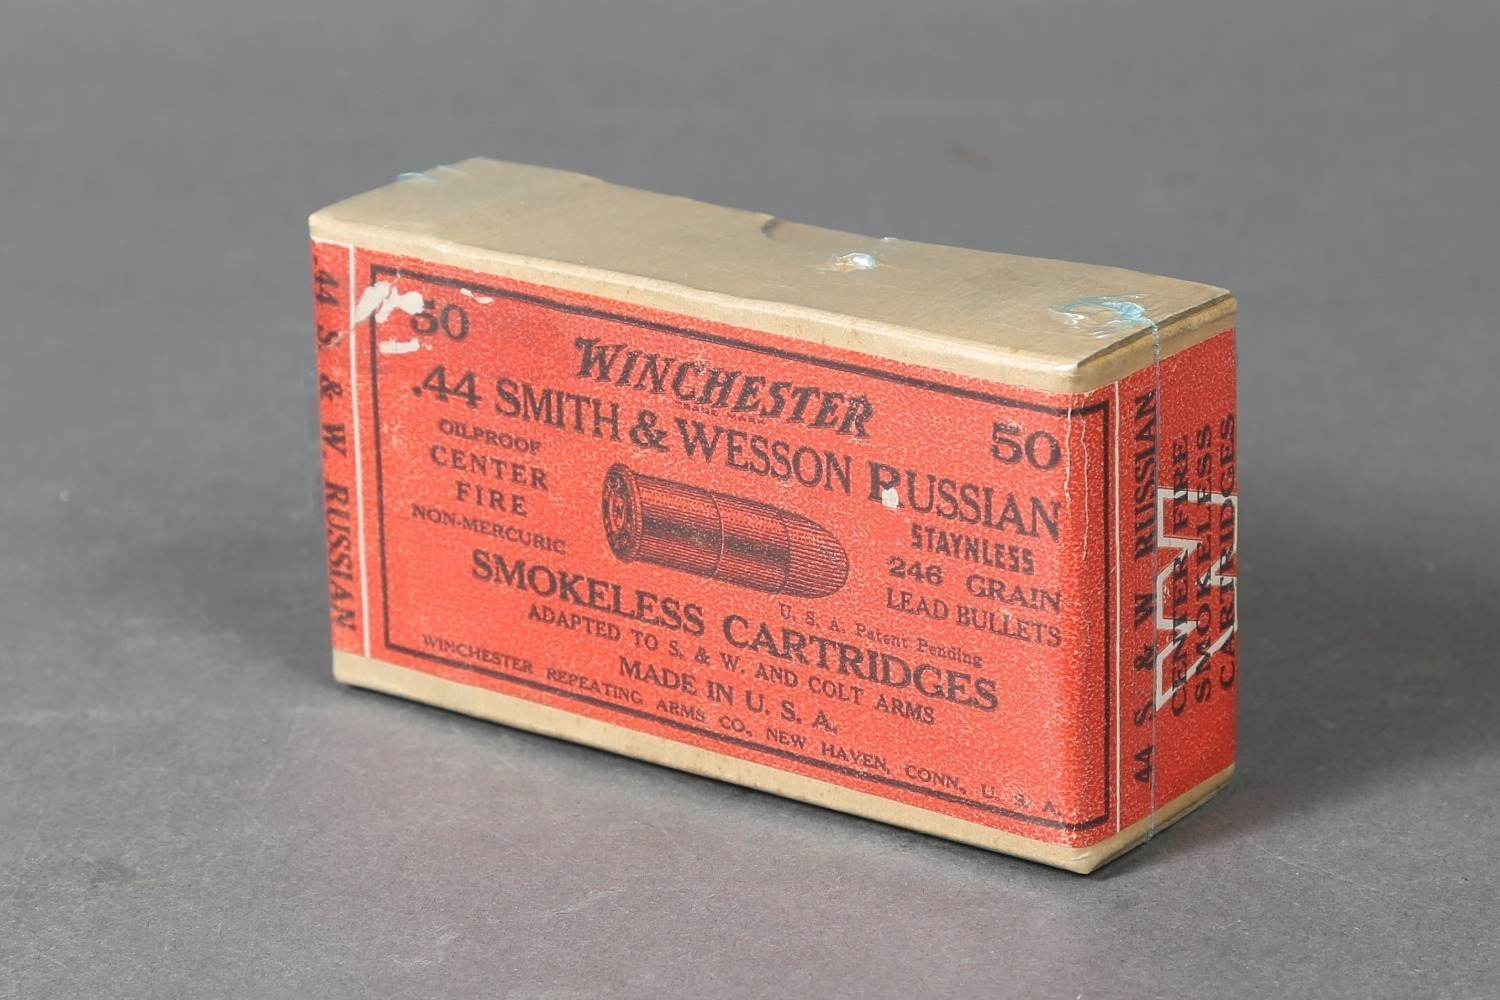 1 Bx Vintage Winchester .44 S&W Russian Ammo